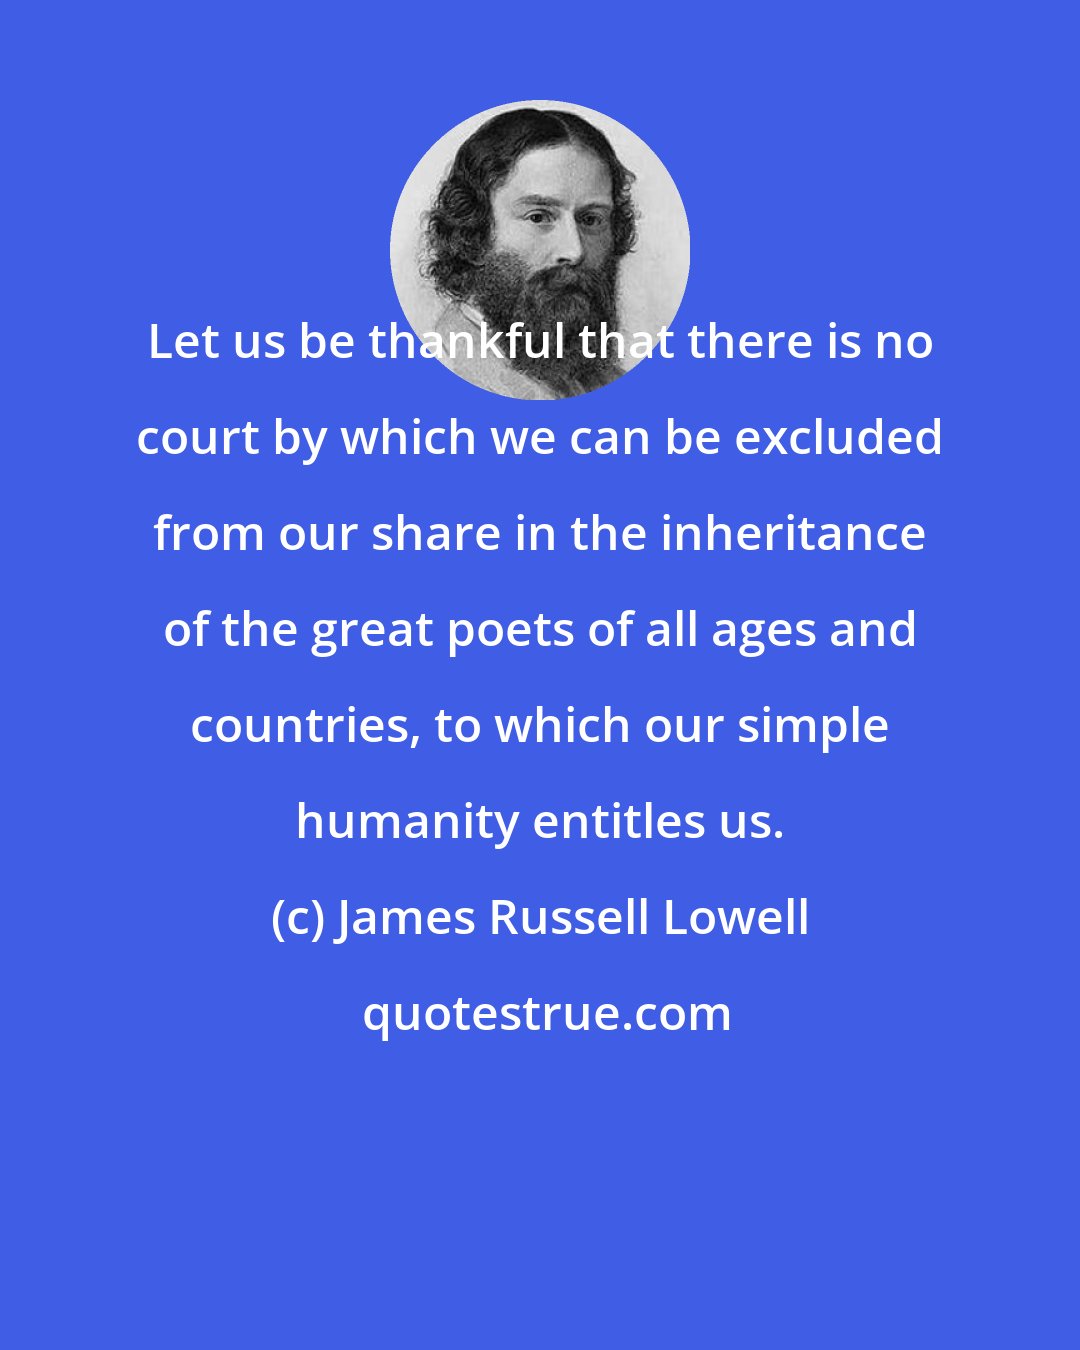 James Russell Lowell: Let us be thankful that there is no court by which we can be excluded from our share in the inheritance of the great poets of all ages and countries, to which our simple humanity entitles us.